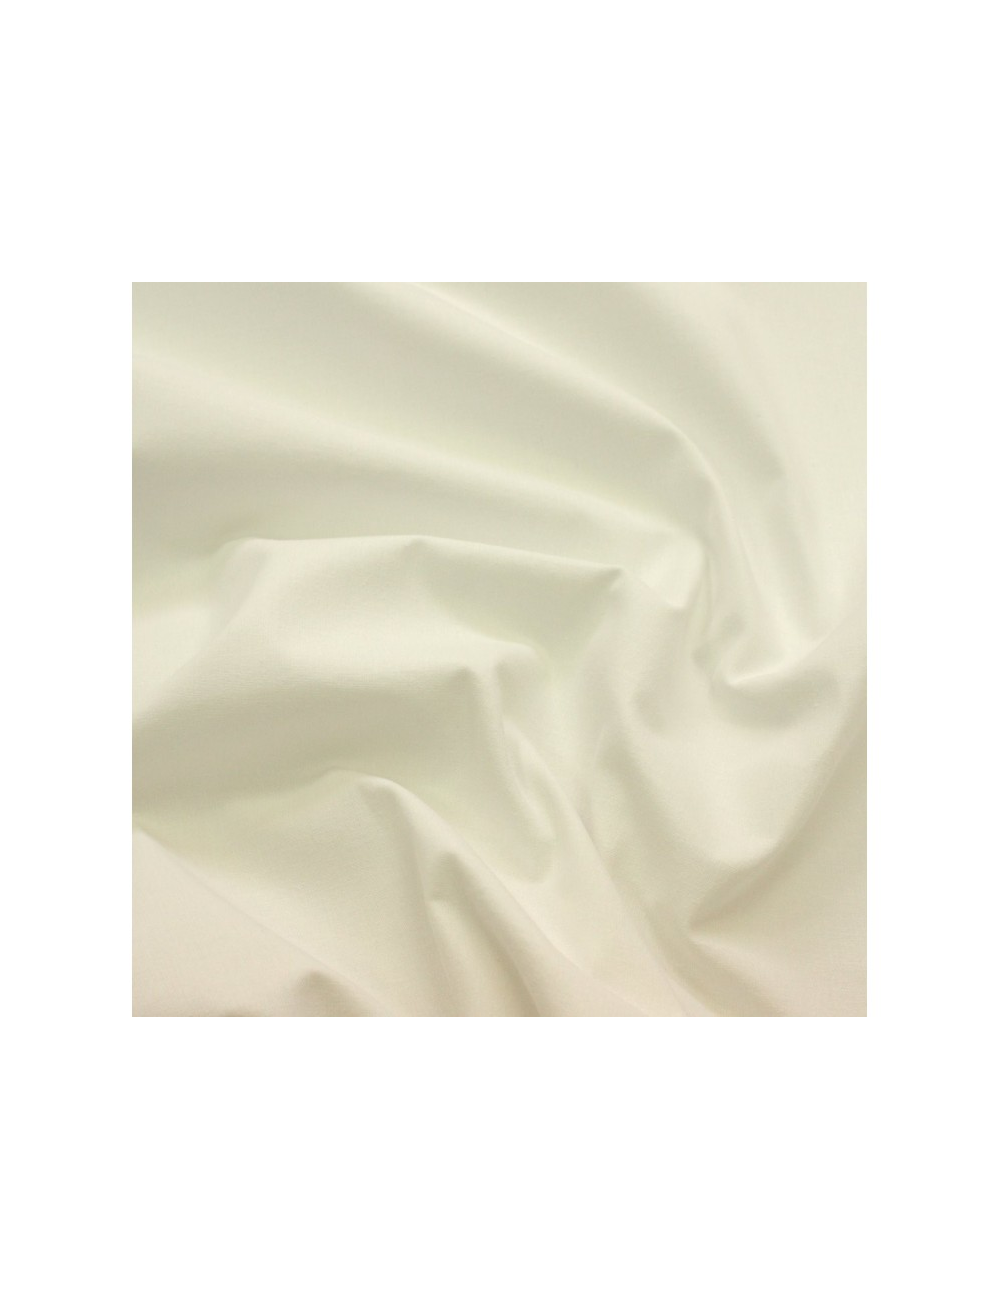 DISTRI SCENES - WHITE Brushed Cotton for stage dressing